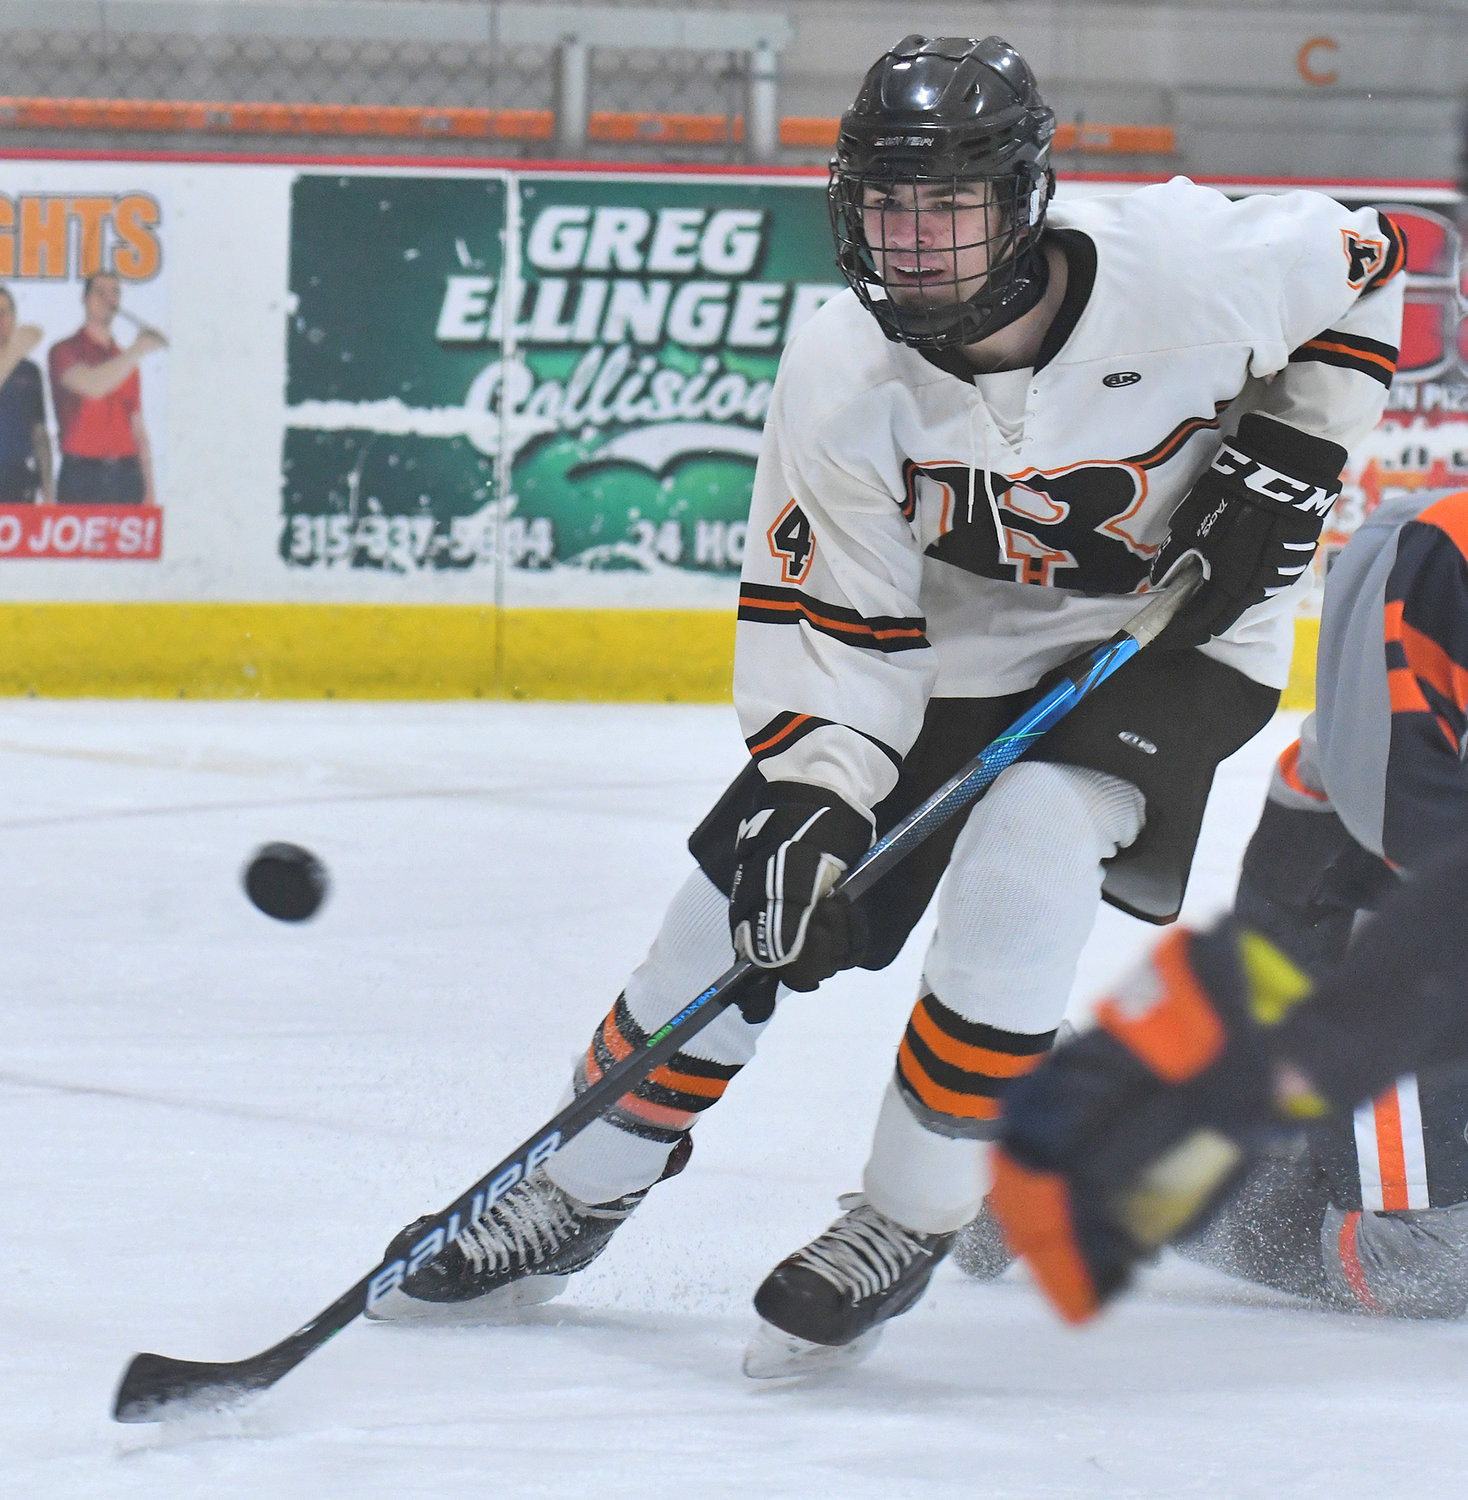 Rome Free Academy senior defenseman Tyler Wilson chases down the puck in front of the Liverpool goal at home on Dec. 13. Wilson was named a Section III Division 1 second team all-star.